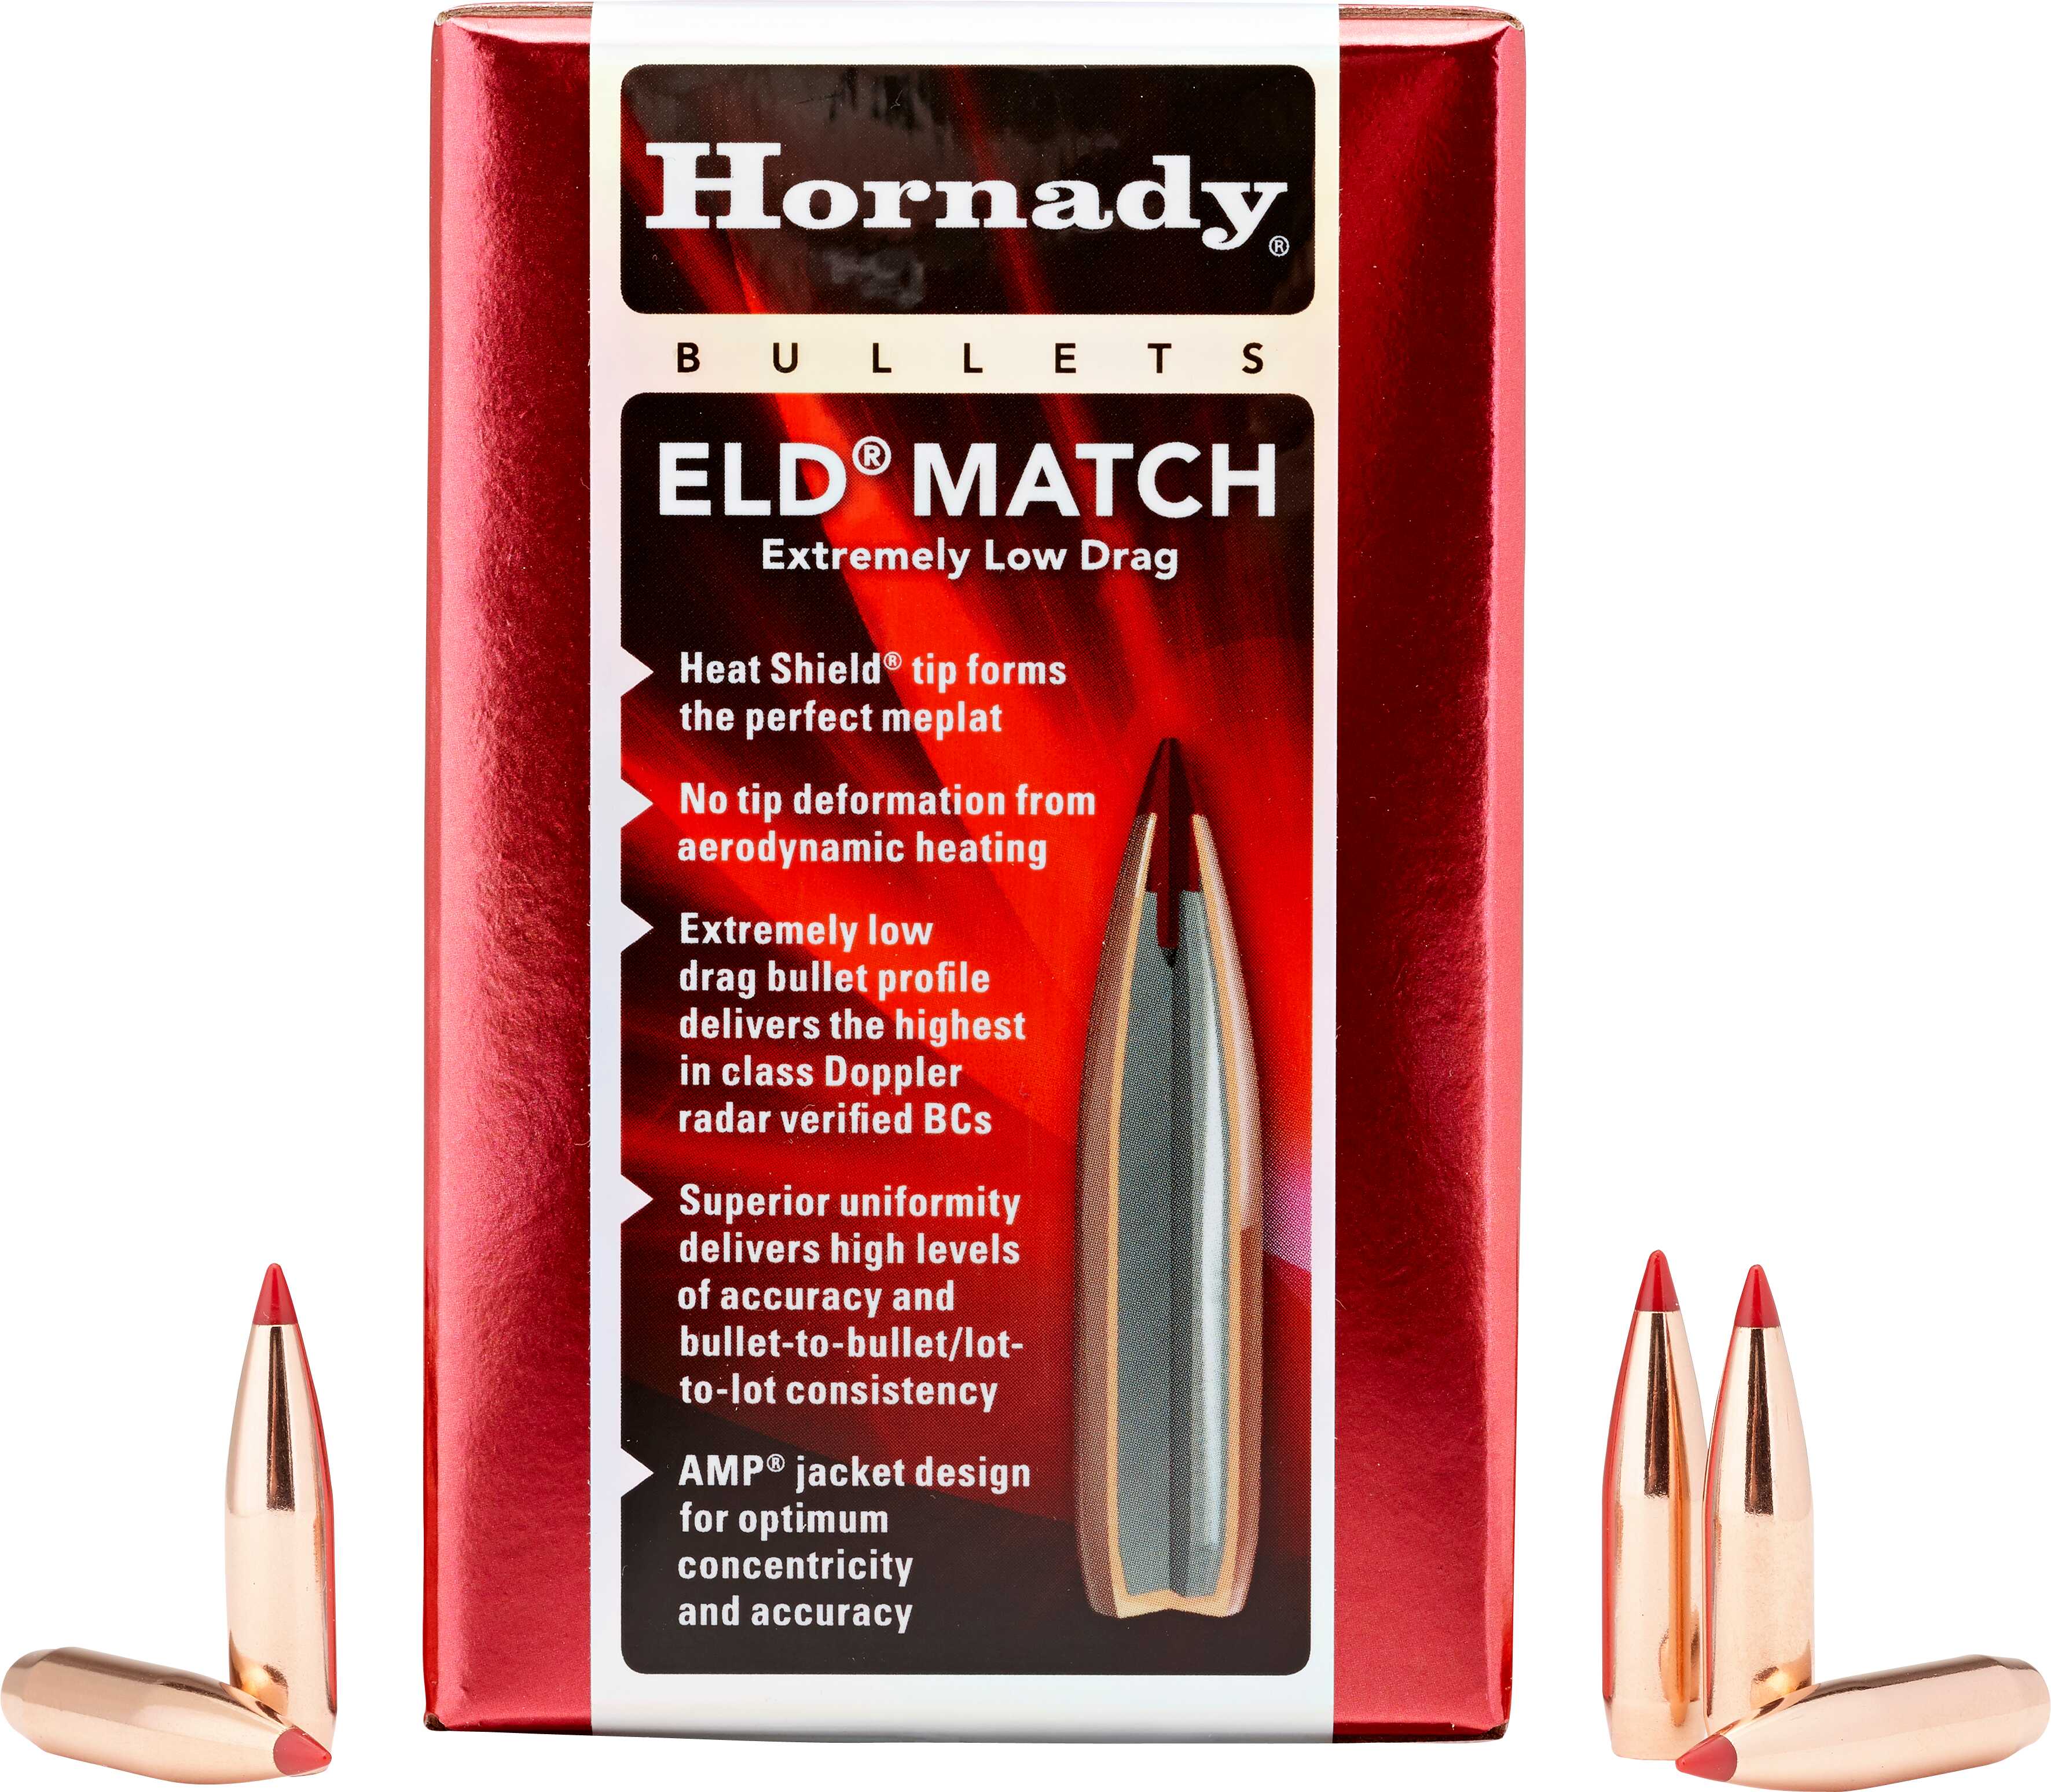 Hornady 338 Caliber Bullets 285 Grain Boat Tail ELD Match 50 Count Md: 33381